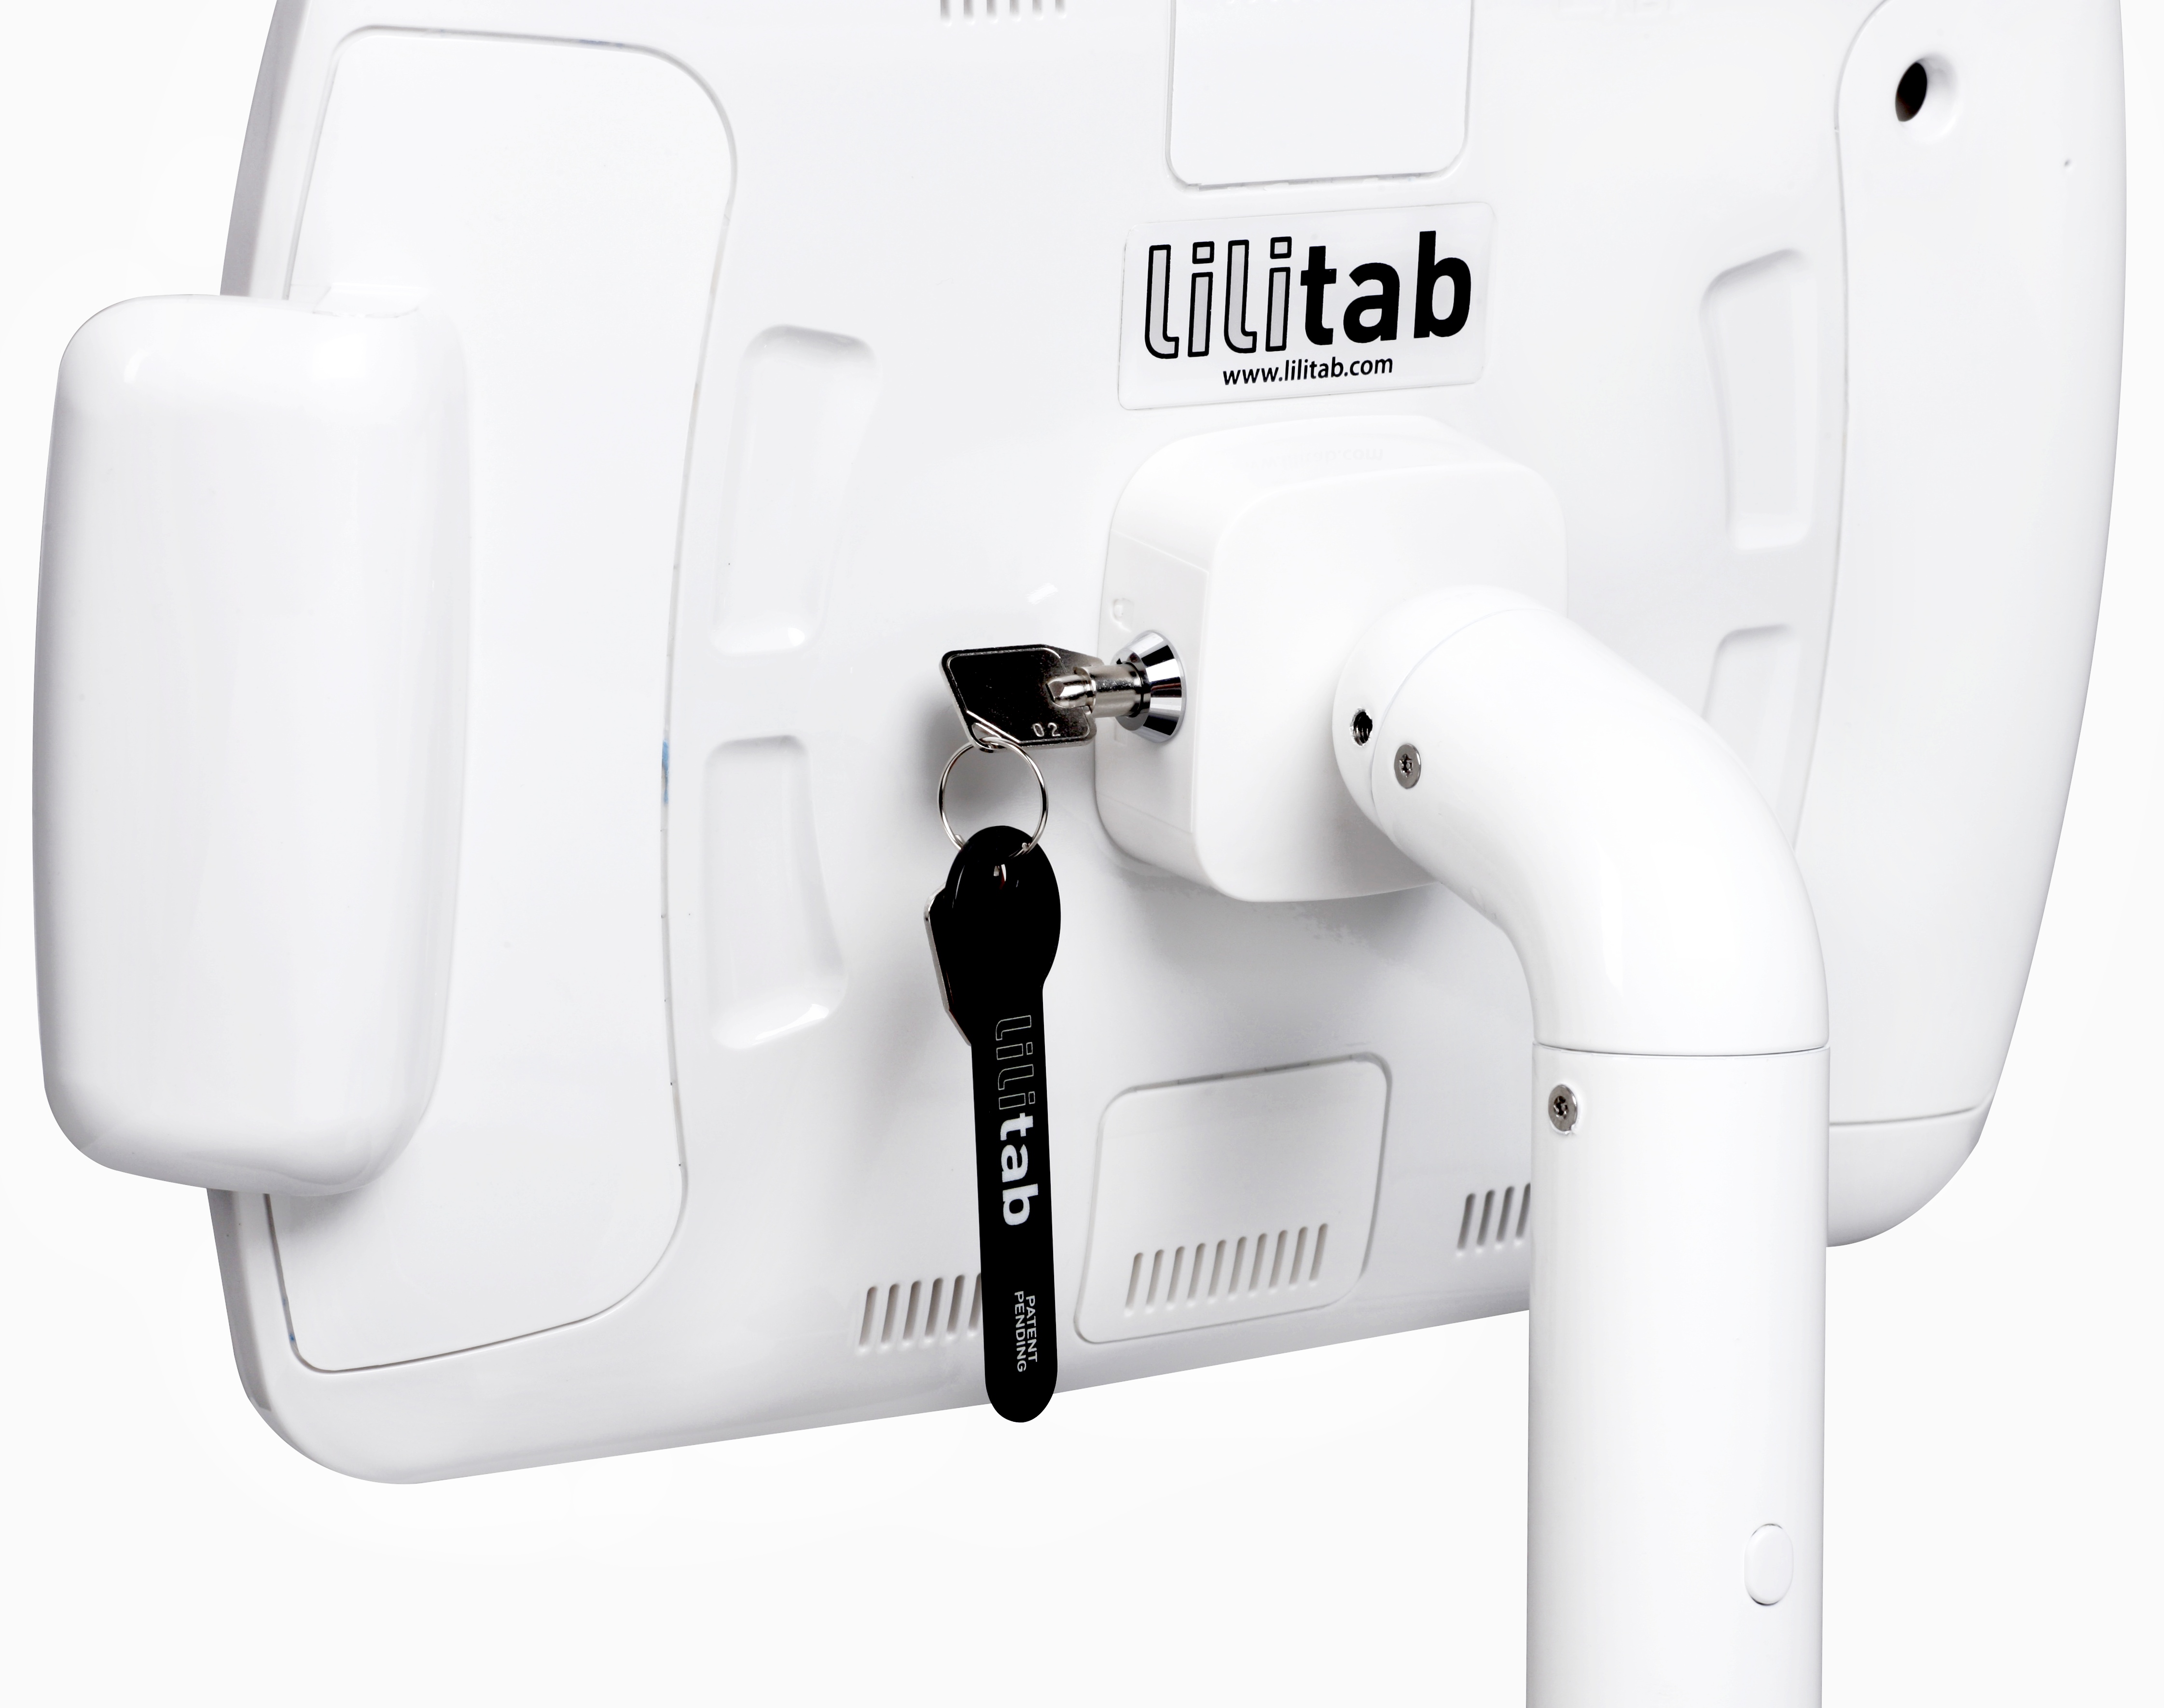 Lilitab's new MagDock lock for secure pass-through power